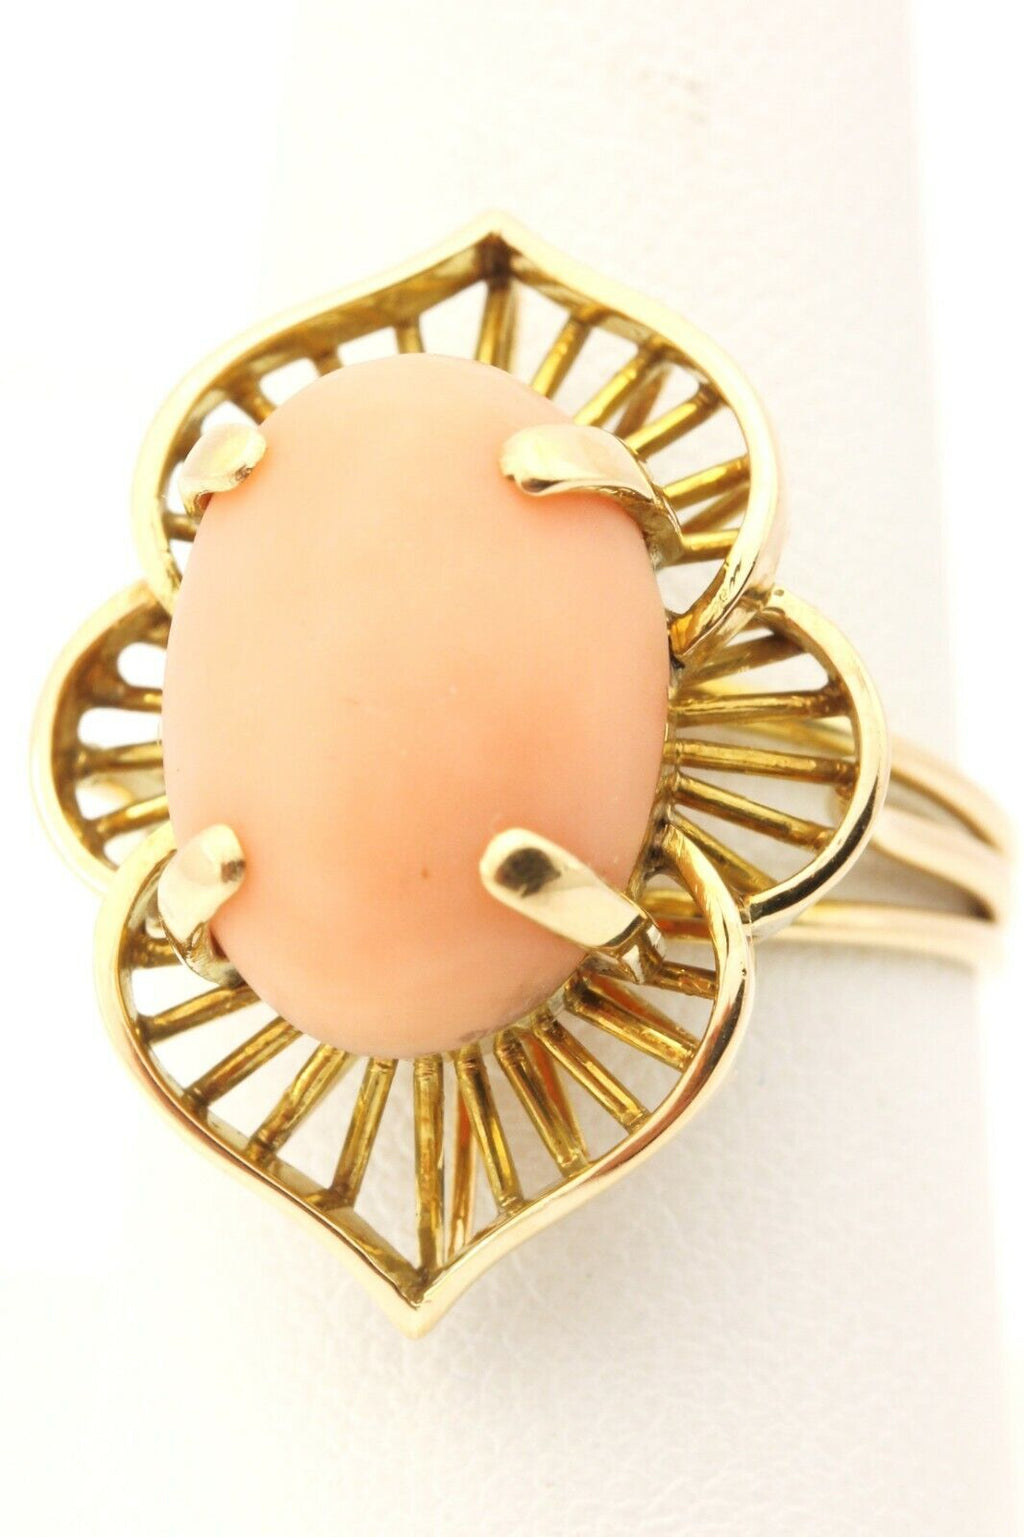 14k yellow gold 15x10.5mm oval angel skin pink coral ring size 8.25 vintage 6.7g